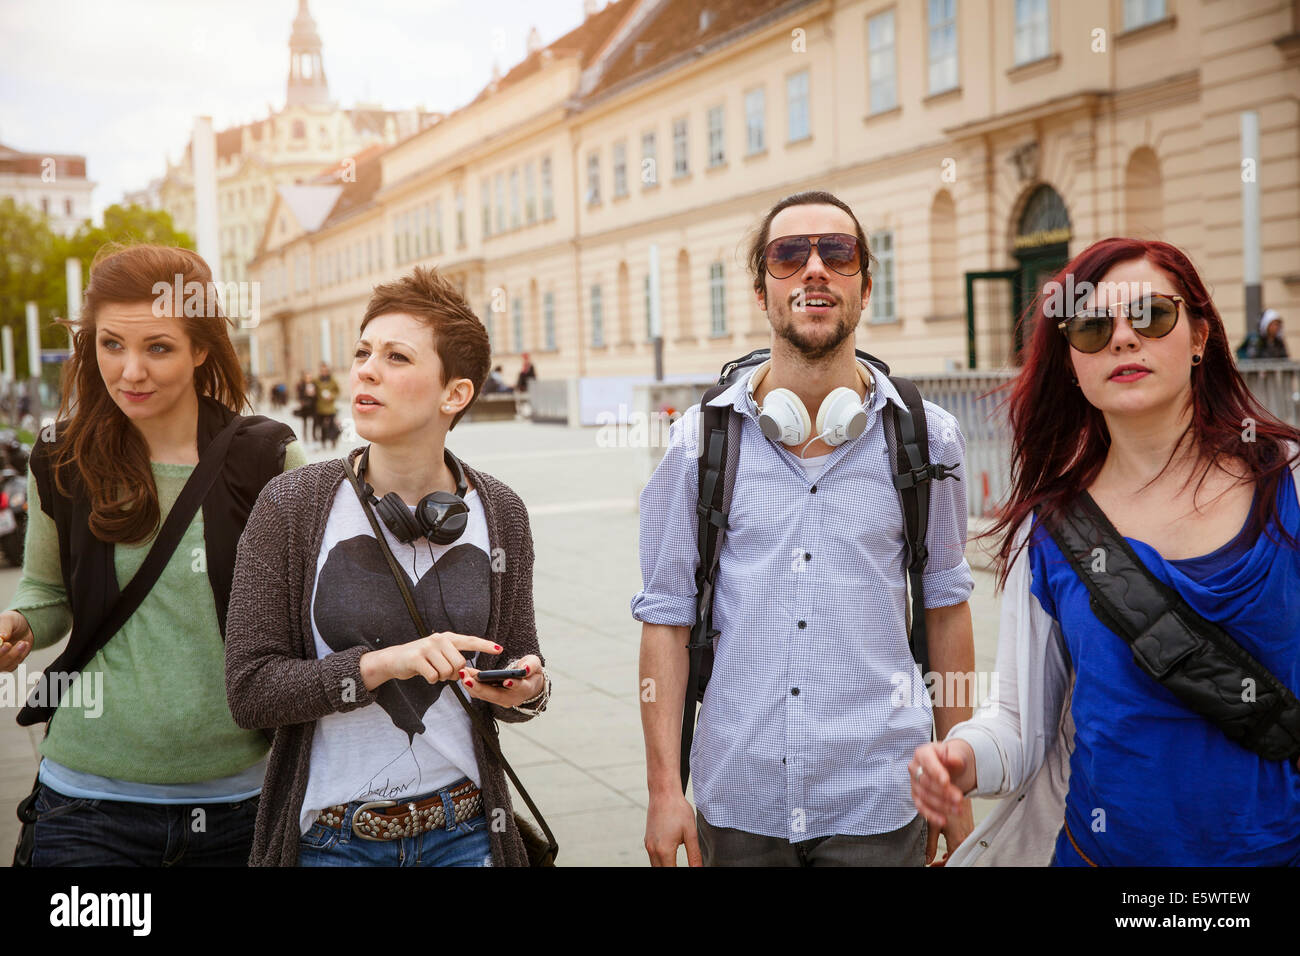 Group of young adults, sightseeing Stock Photo